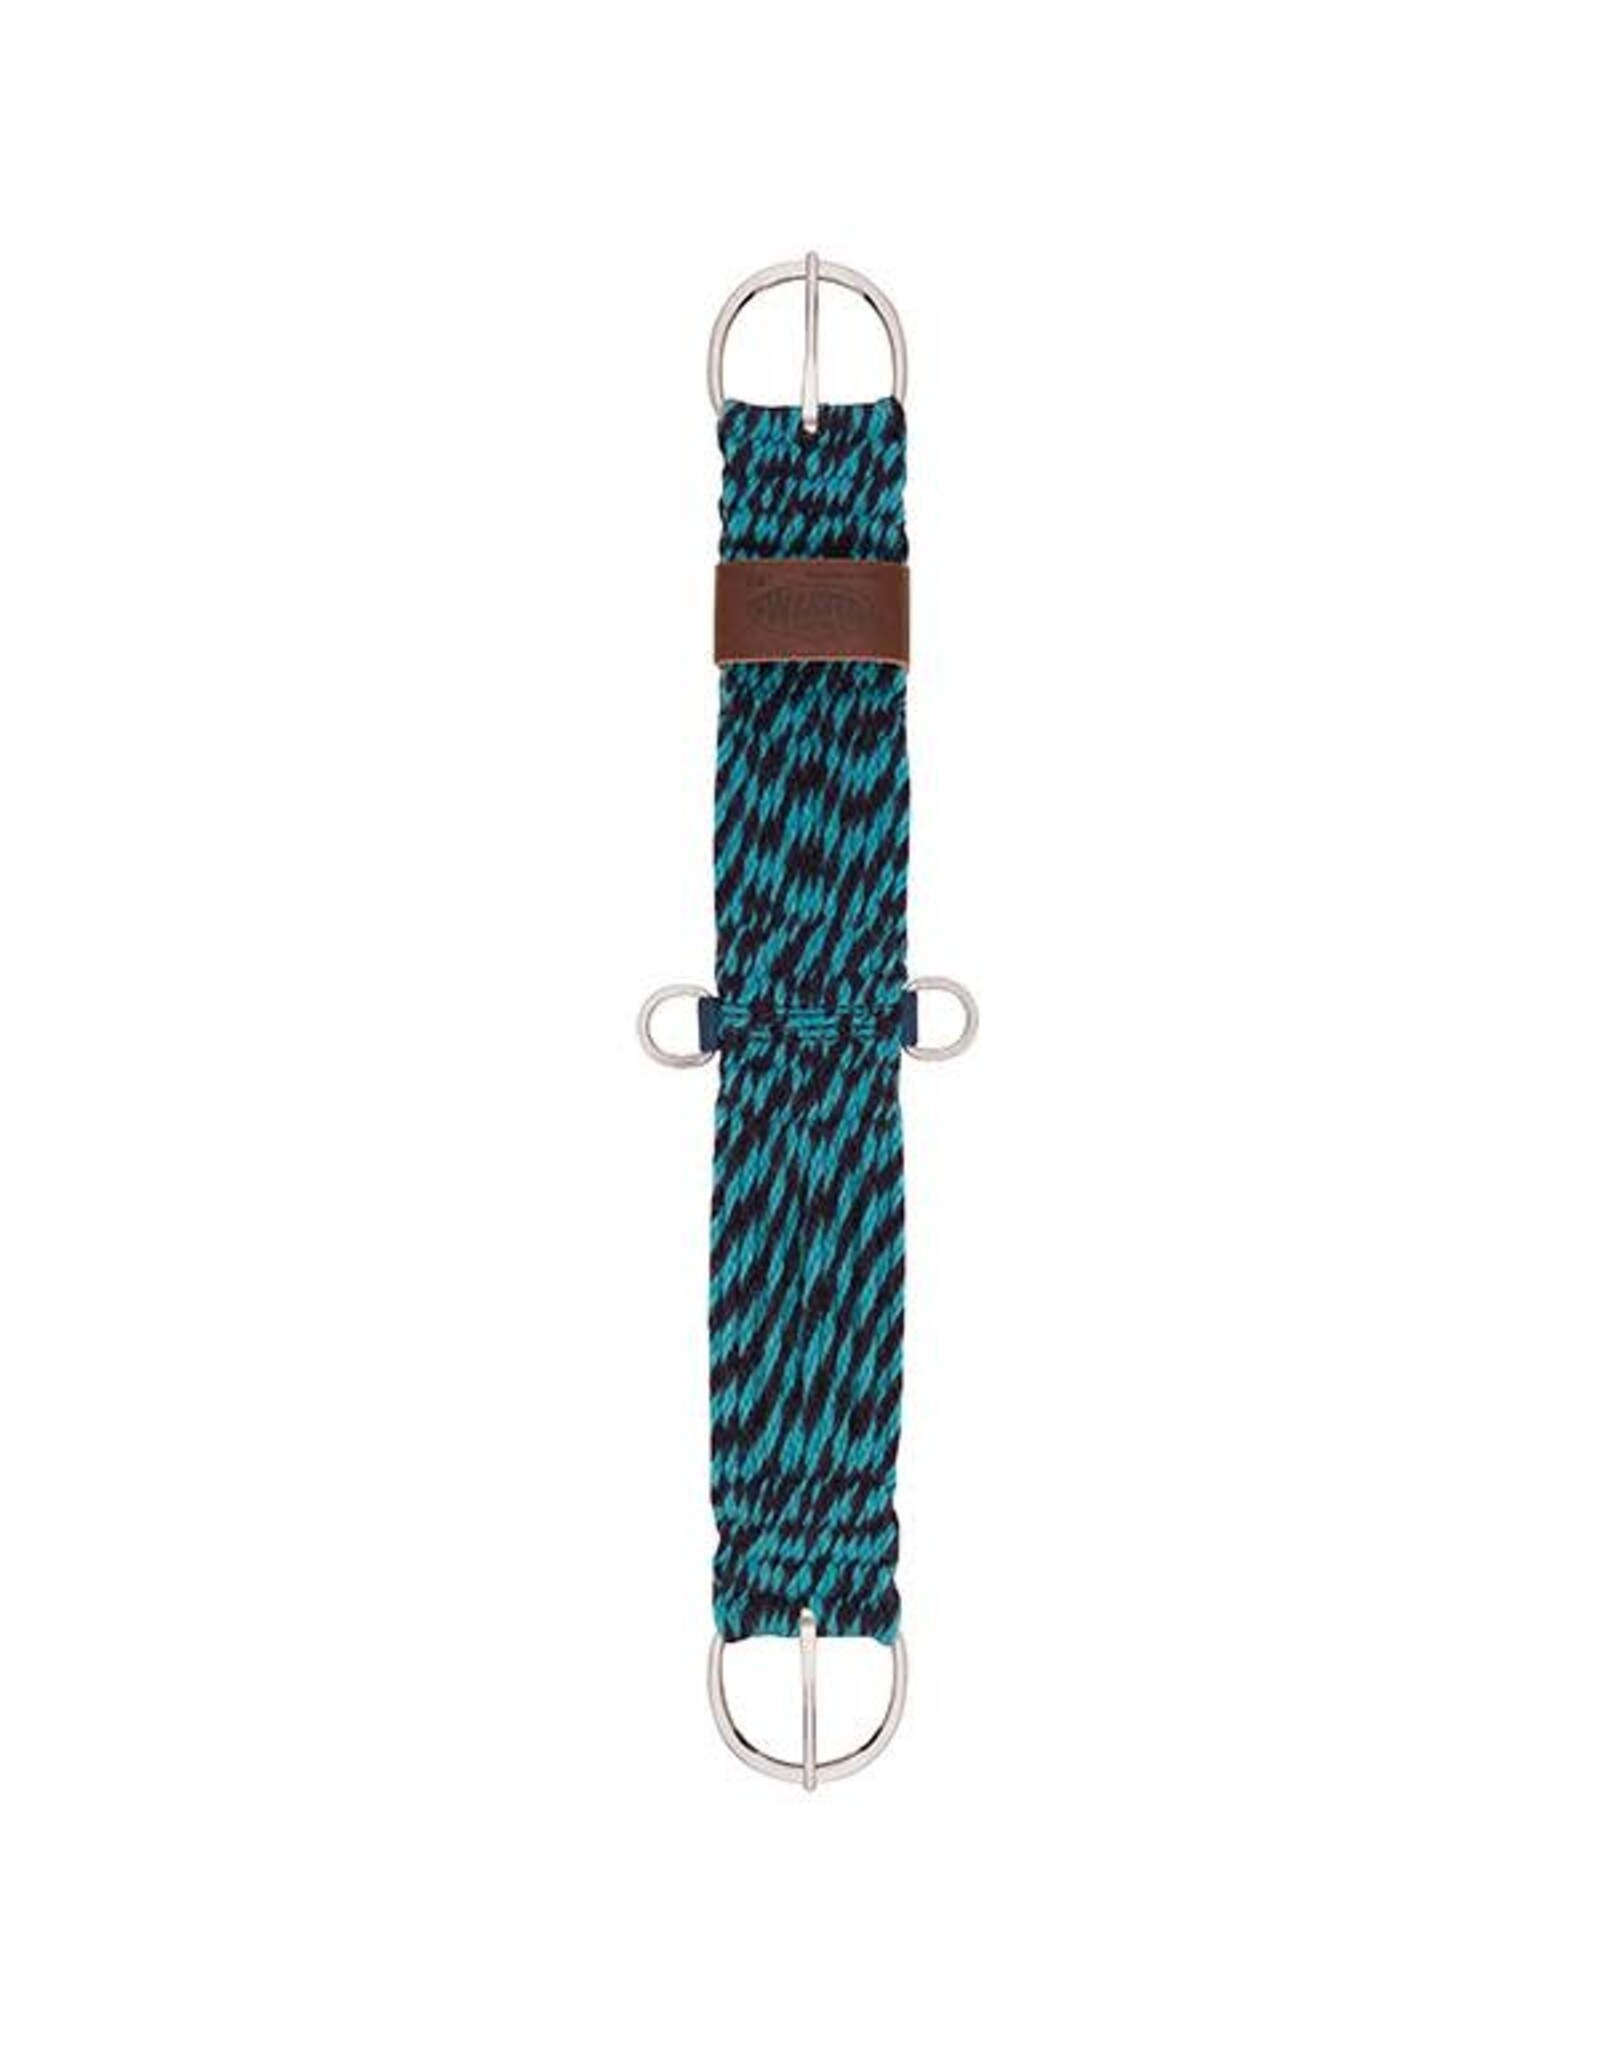 100% Mohair 27-Strand Cinch - Straight - 28" 35405-20-28-253 Navy/Turquoise